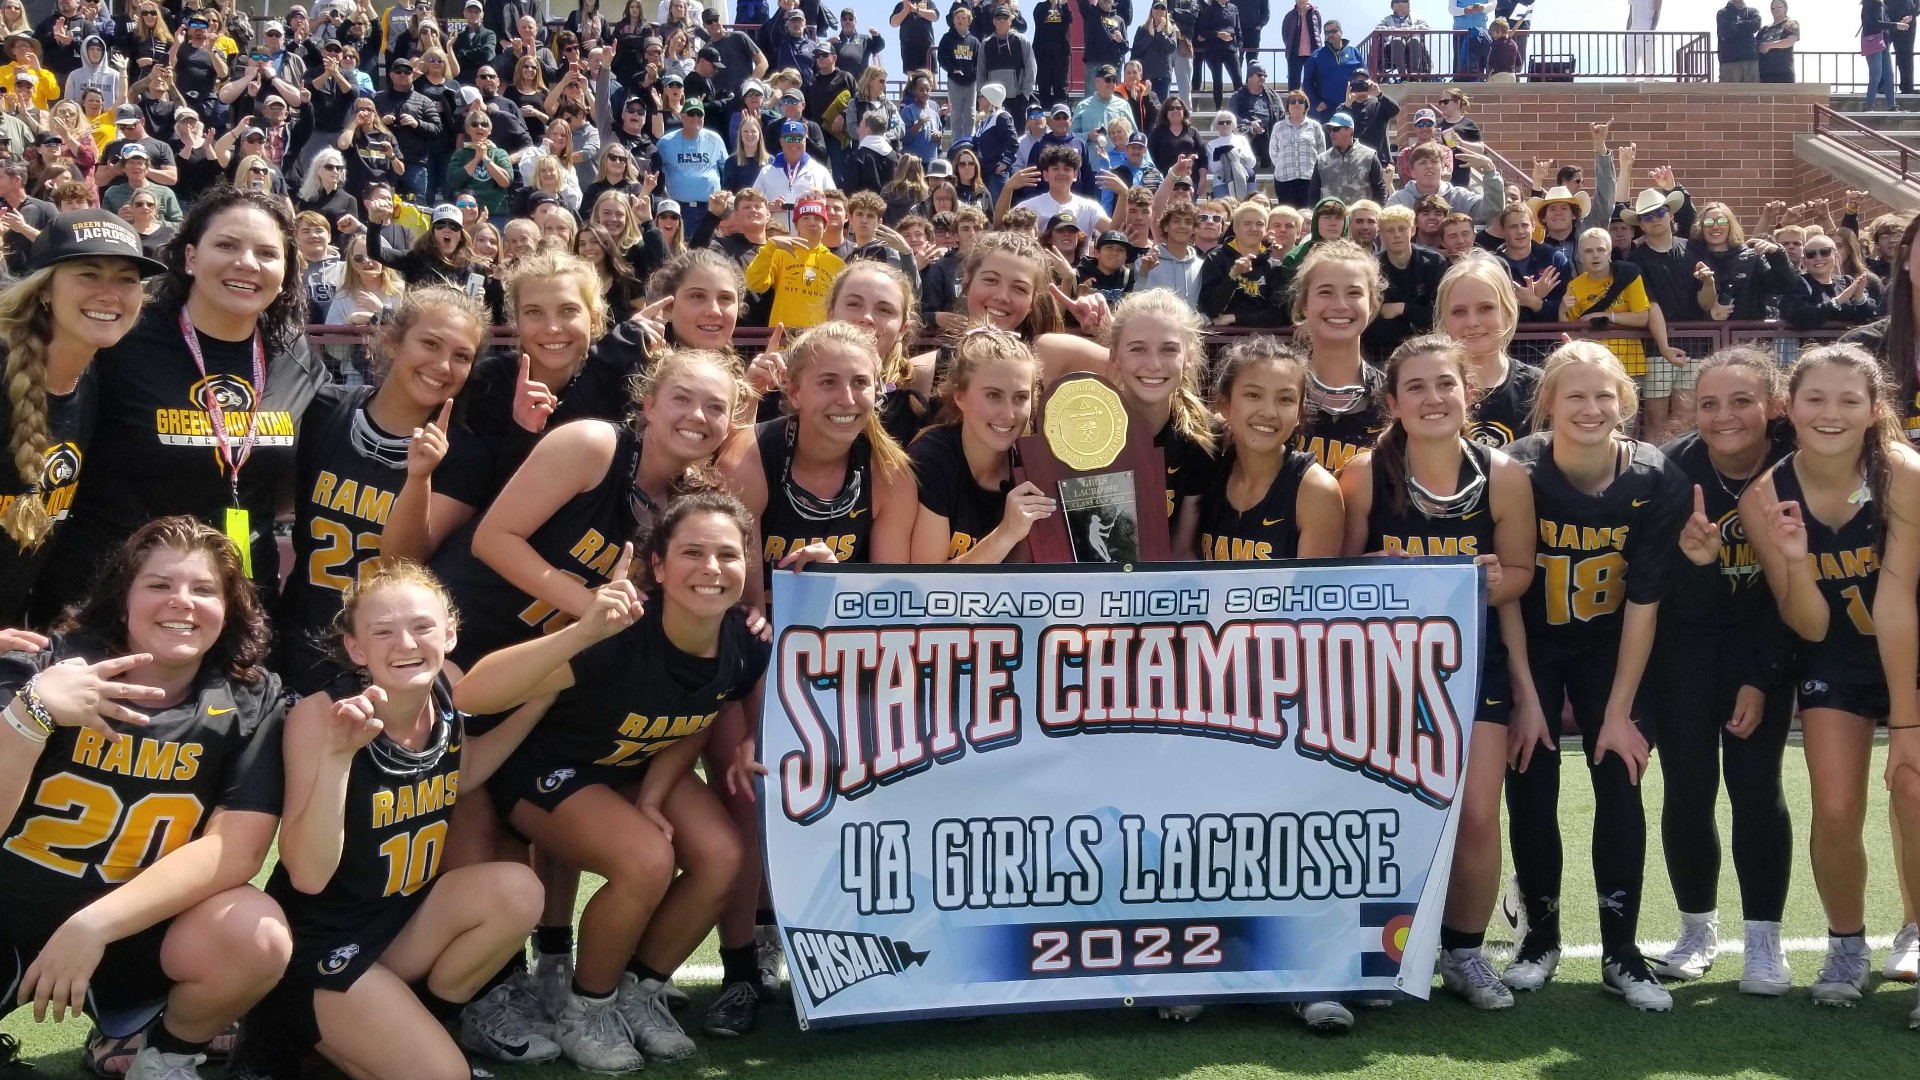 The Rams defeated Thompson Valley 16-10 to win their first title in program history.